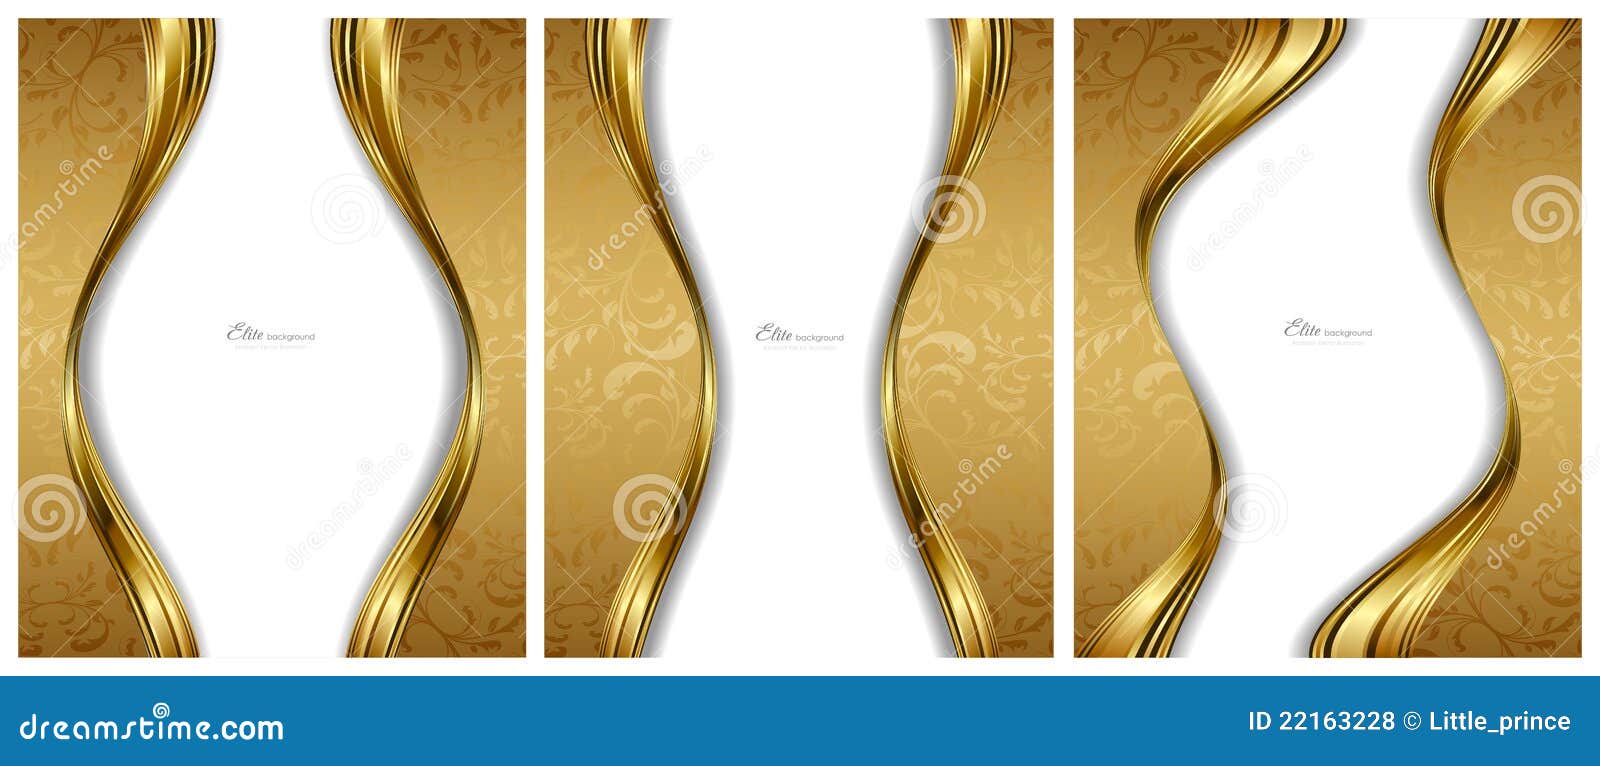 abstract gold backgrounds templates